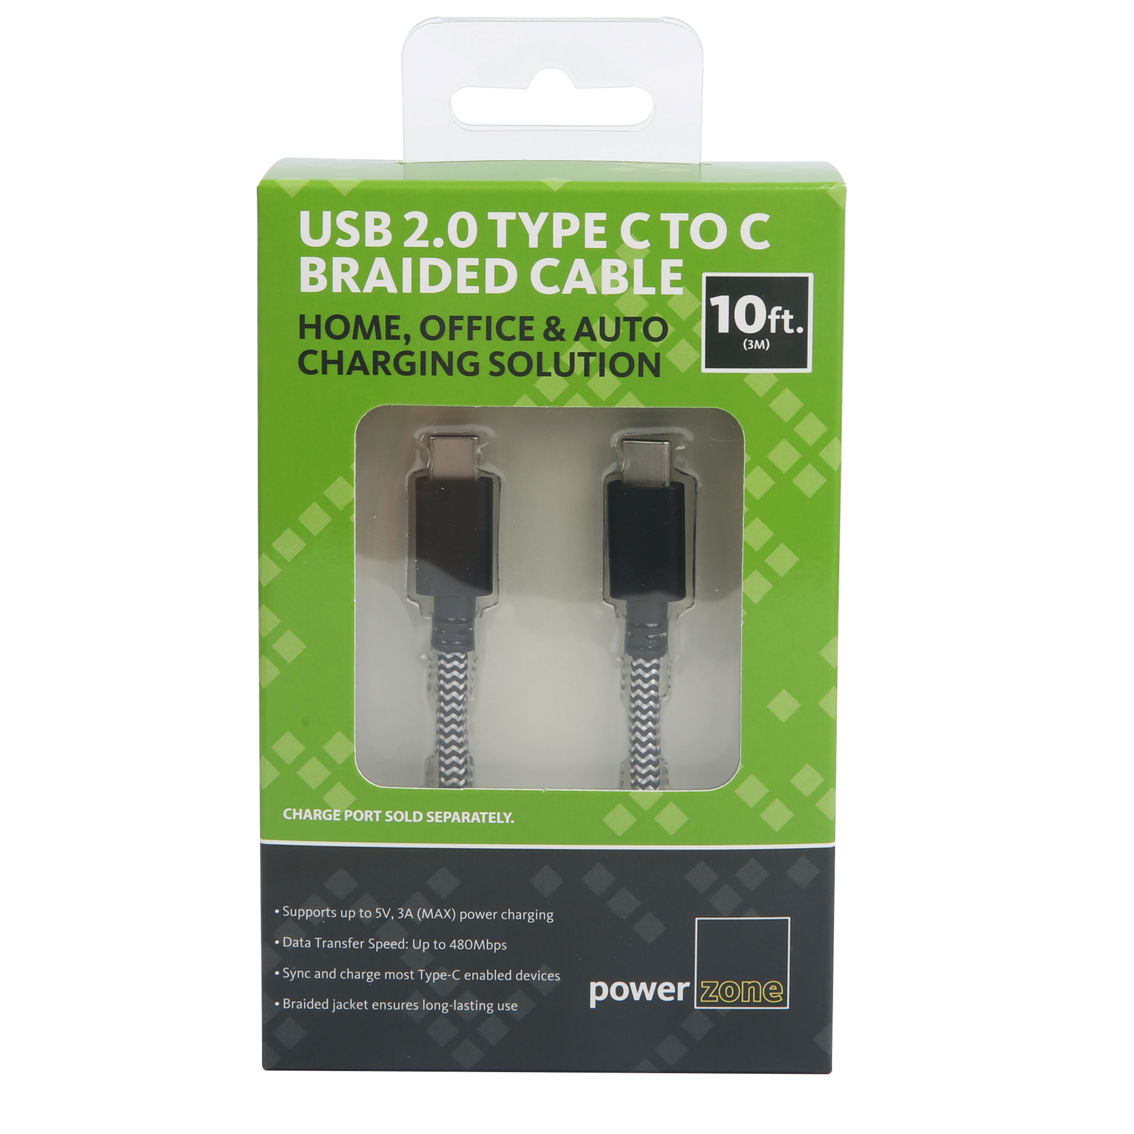 Powerzone USB 2.0 Type C to C 10ft. Braided Cable - Image 3 of 5